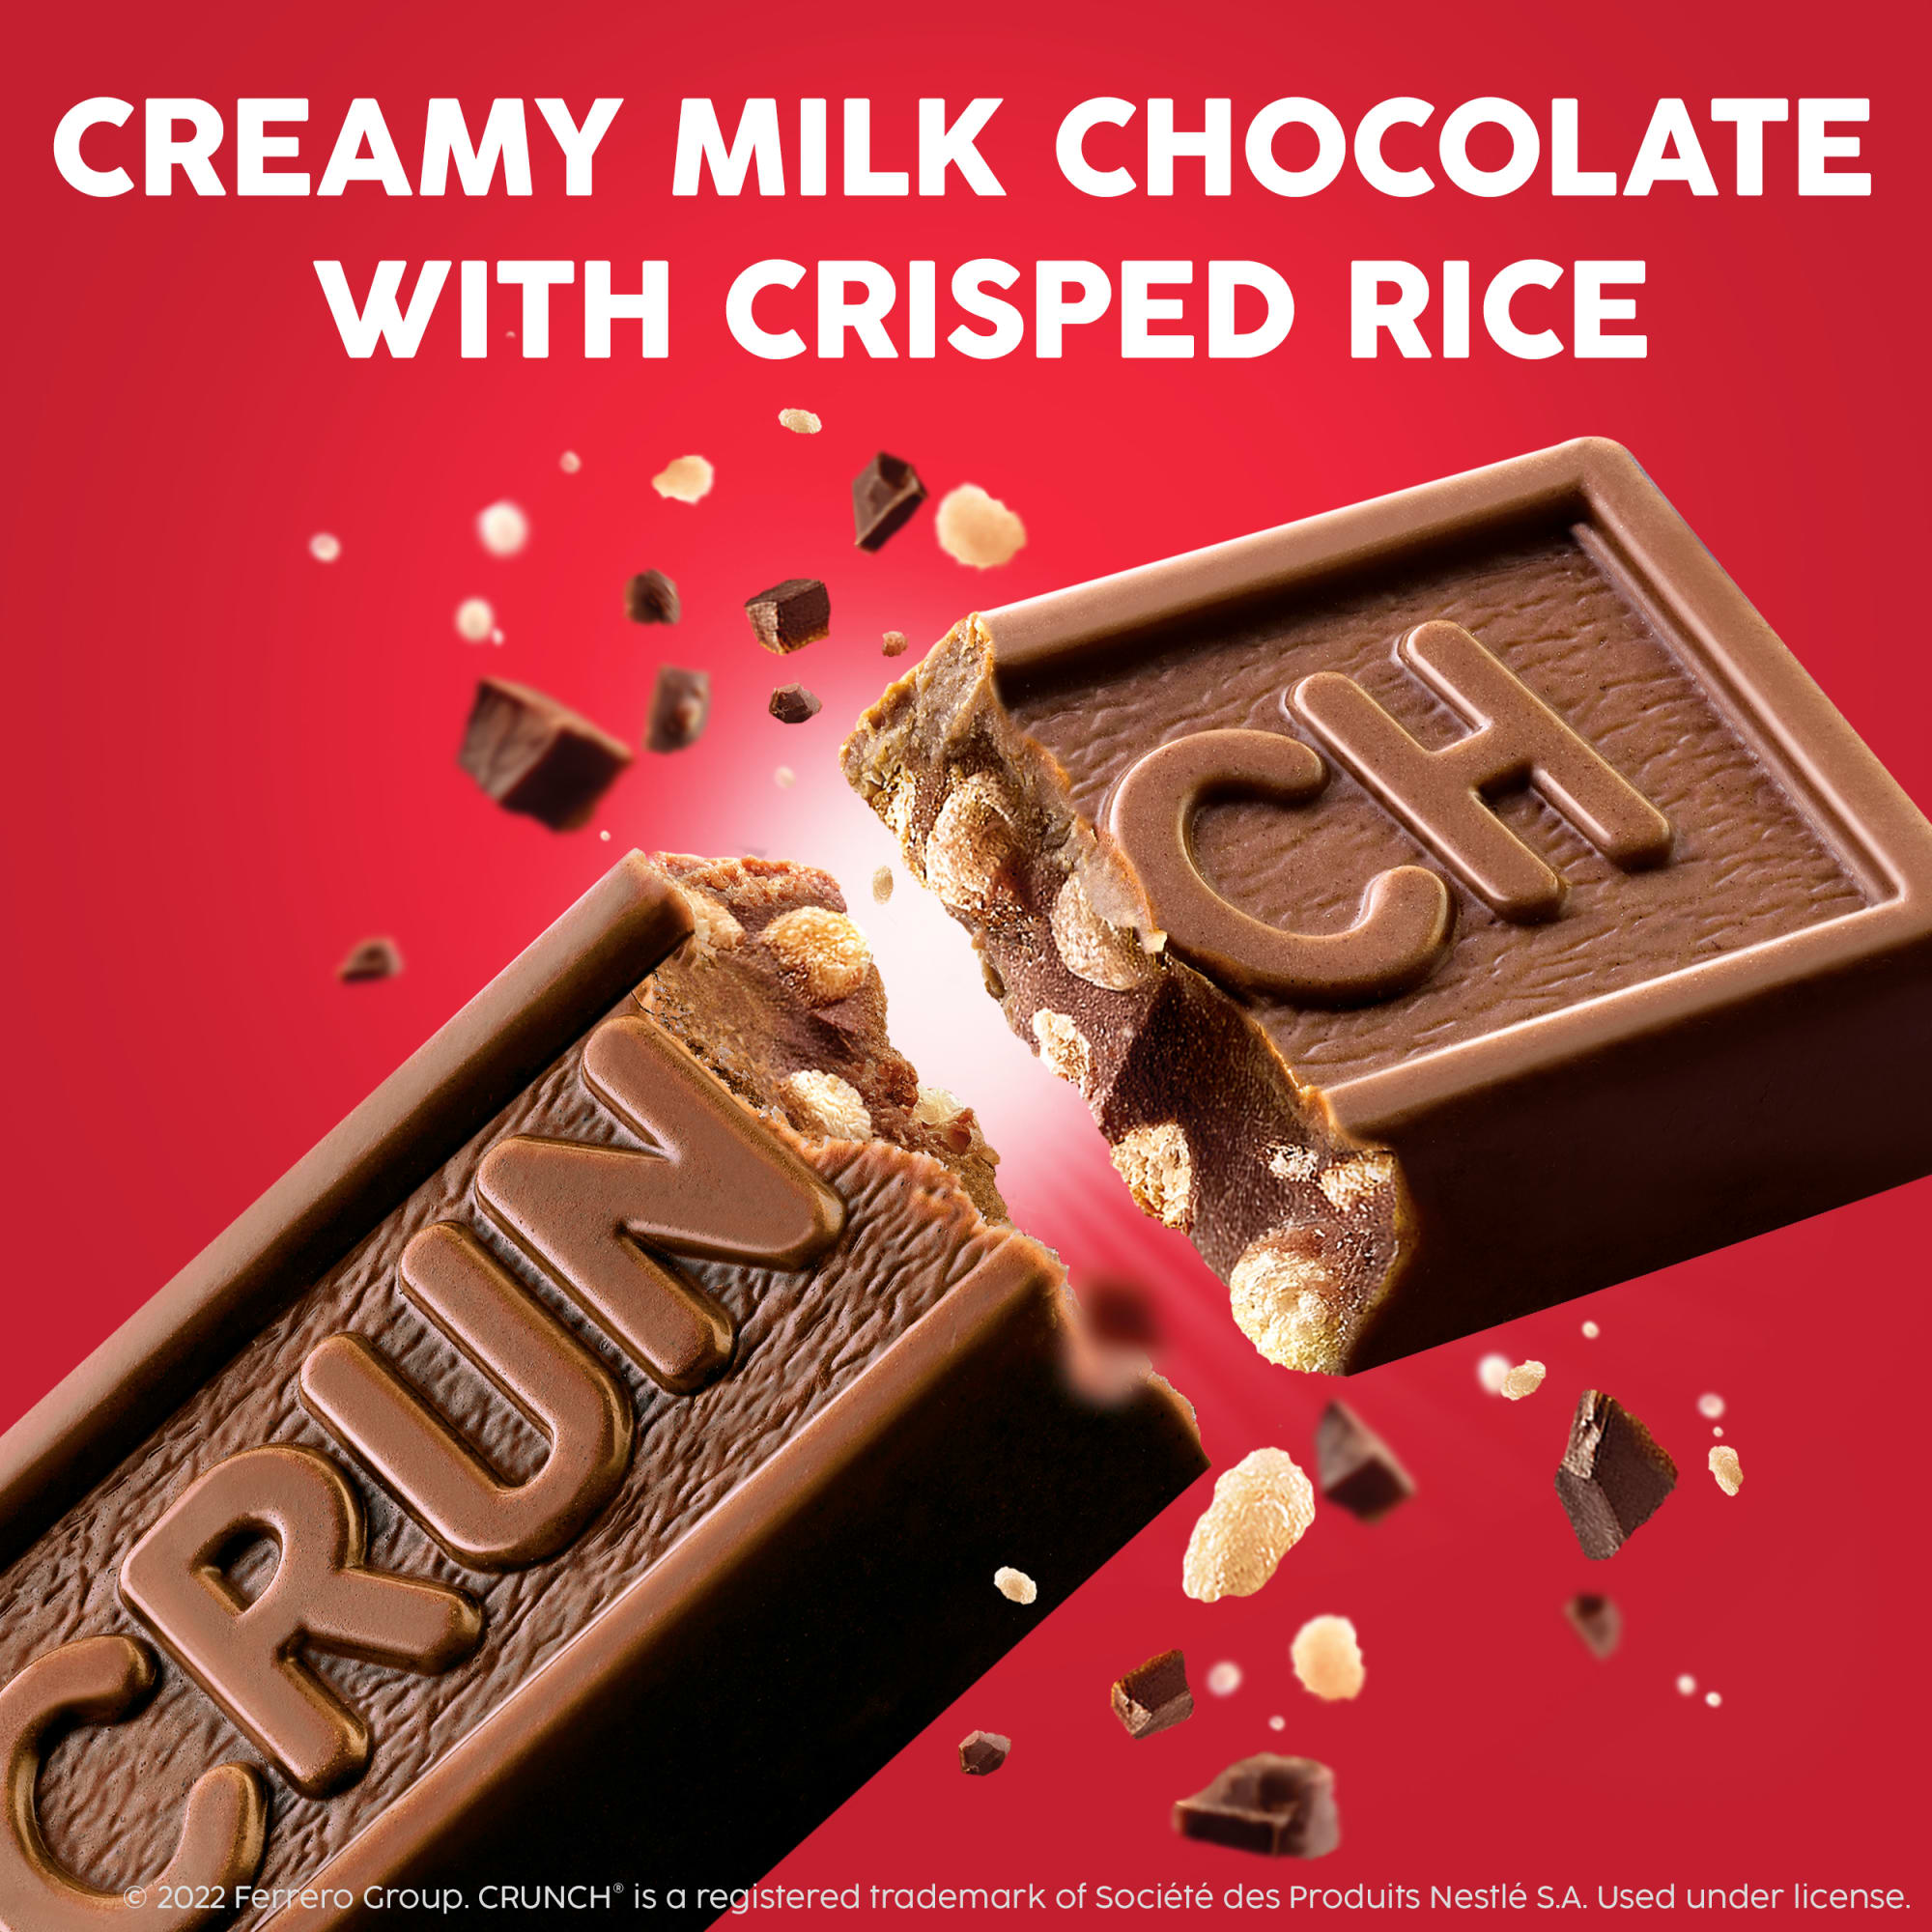 CRUNCH Milk Chocolate and Crisped Rice, Share Size Candy Bars, Share Pack, 2.7 oz - image 4 of 9